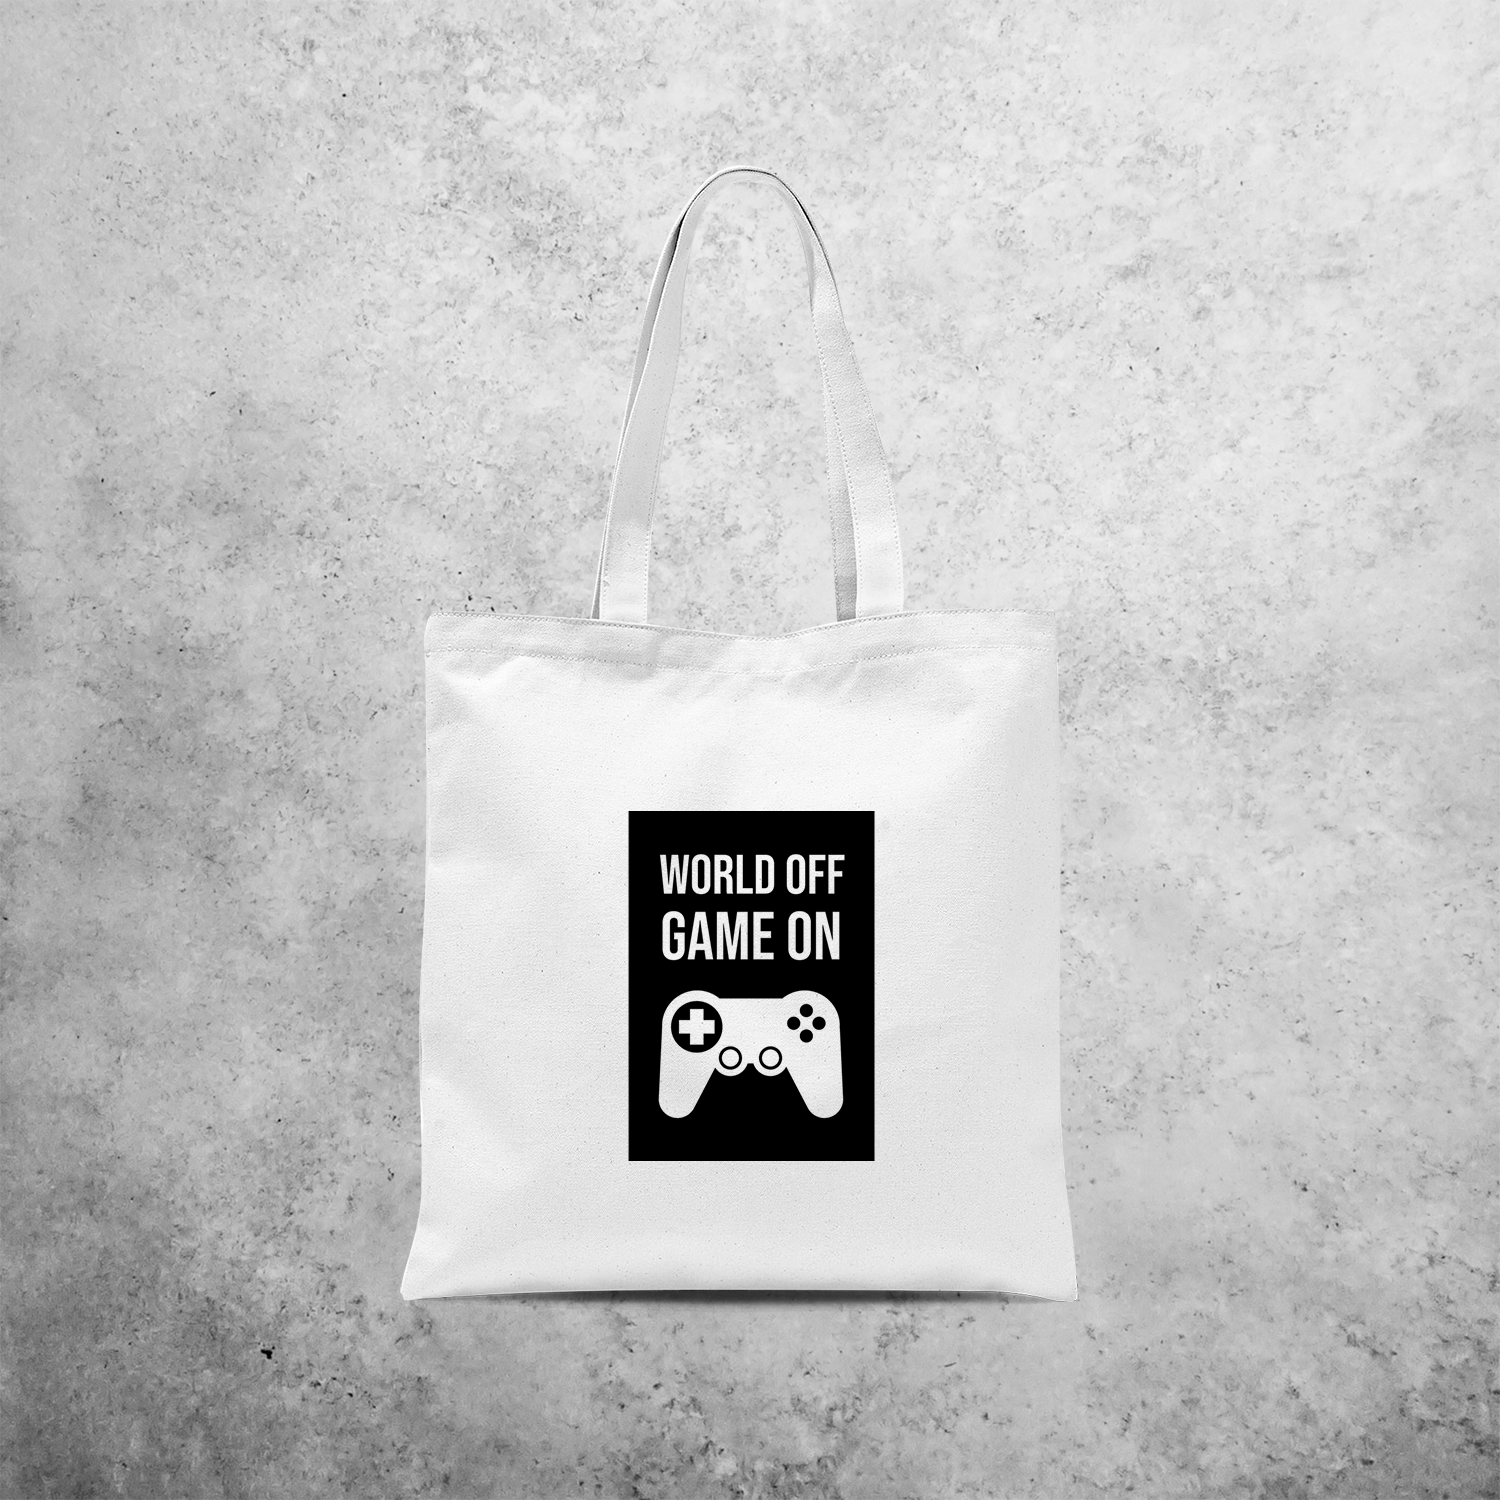 ‘World off – Game on’ tote bag